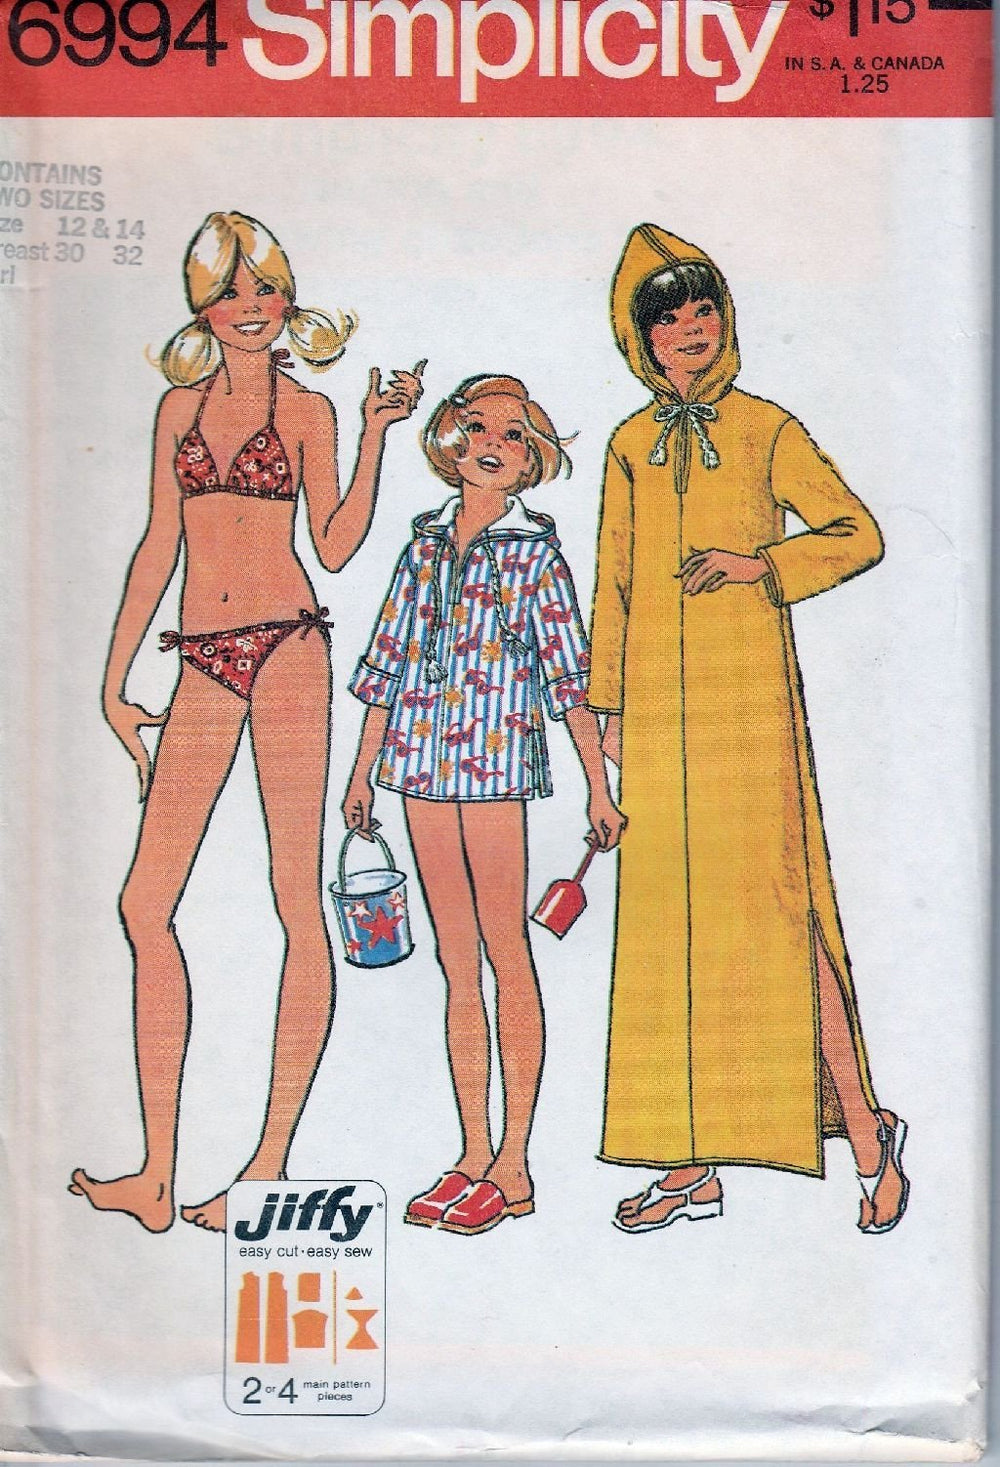 Simplicity 6994 Vintage 1970's Sewing Pattern Girls Beach Cover Up Bikini Bathing Suit - VintageStitching - Vintage Sewing Patterns